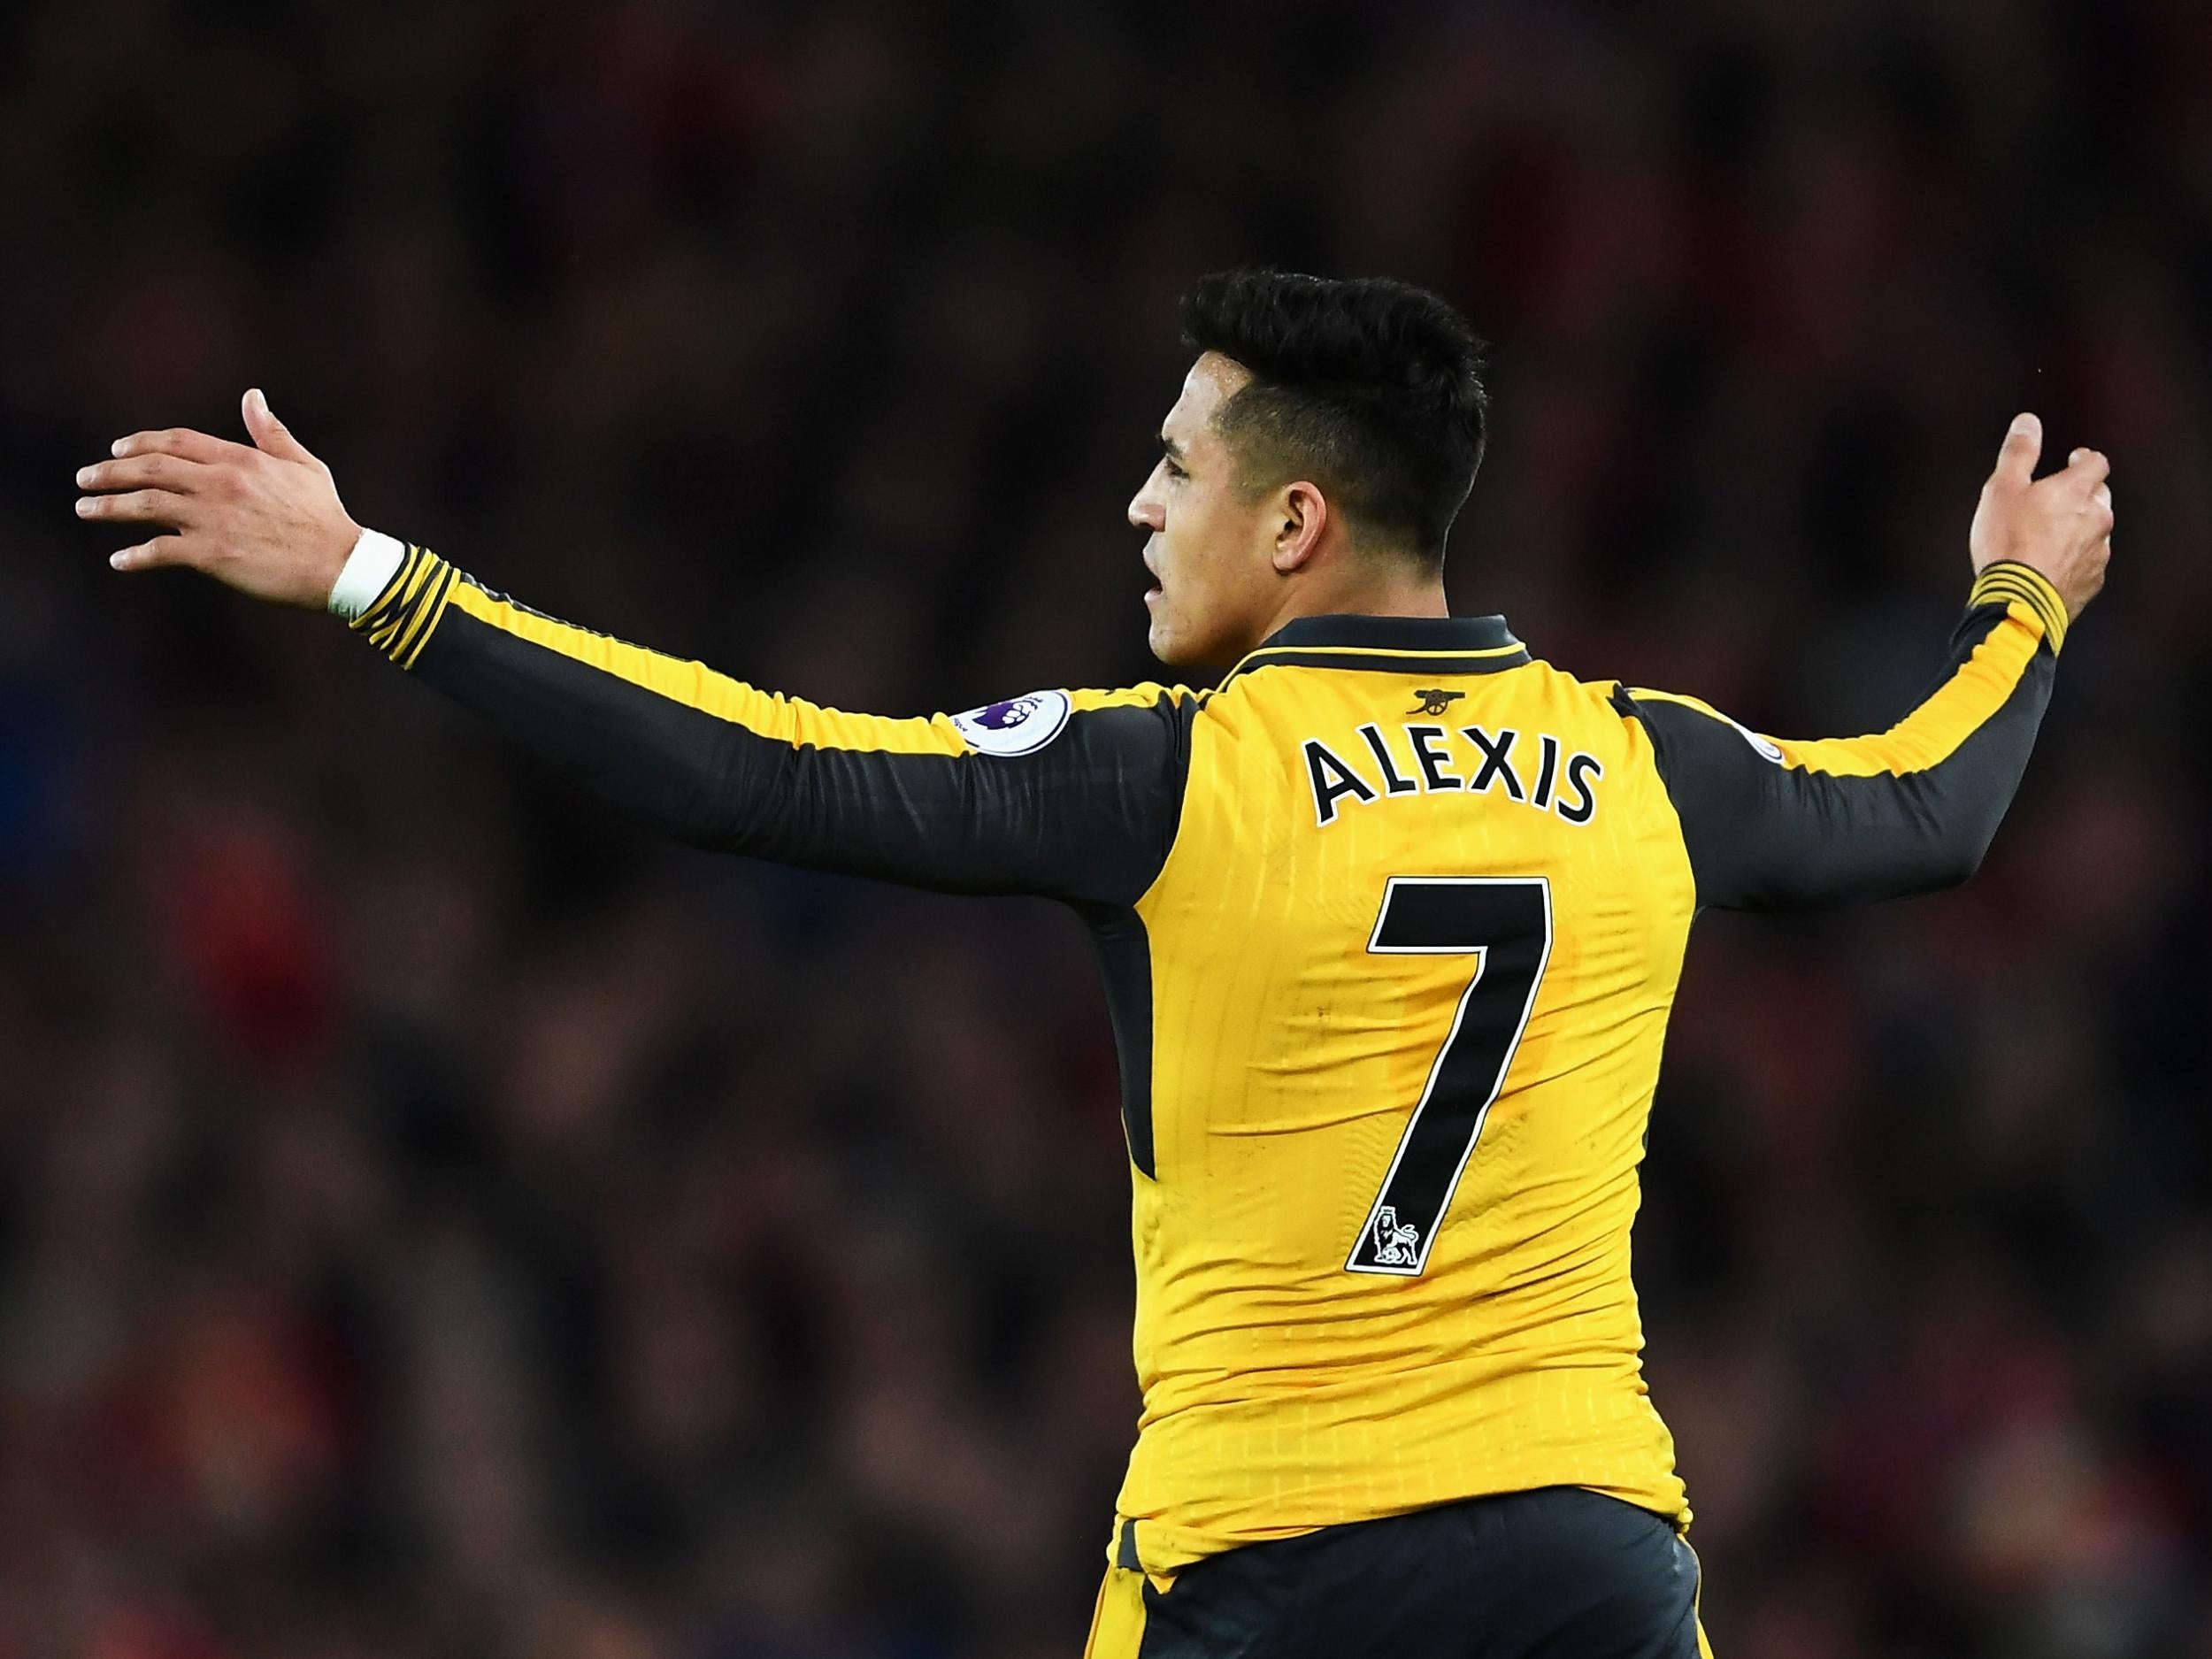 Sanchez has shown the sort of anger that the Arsenal fans have been showing